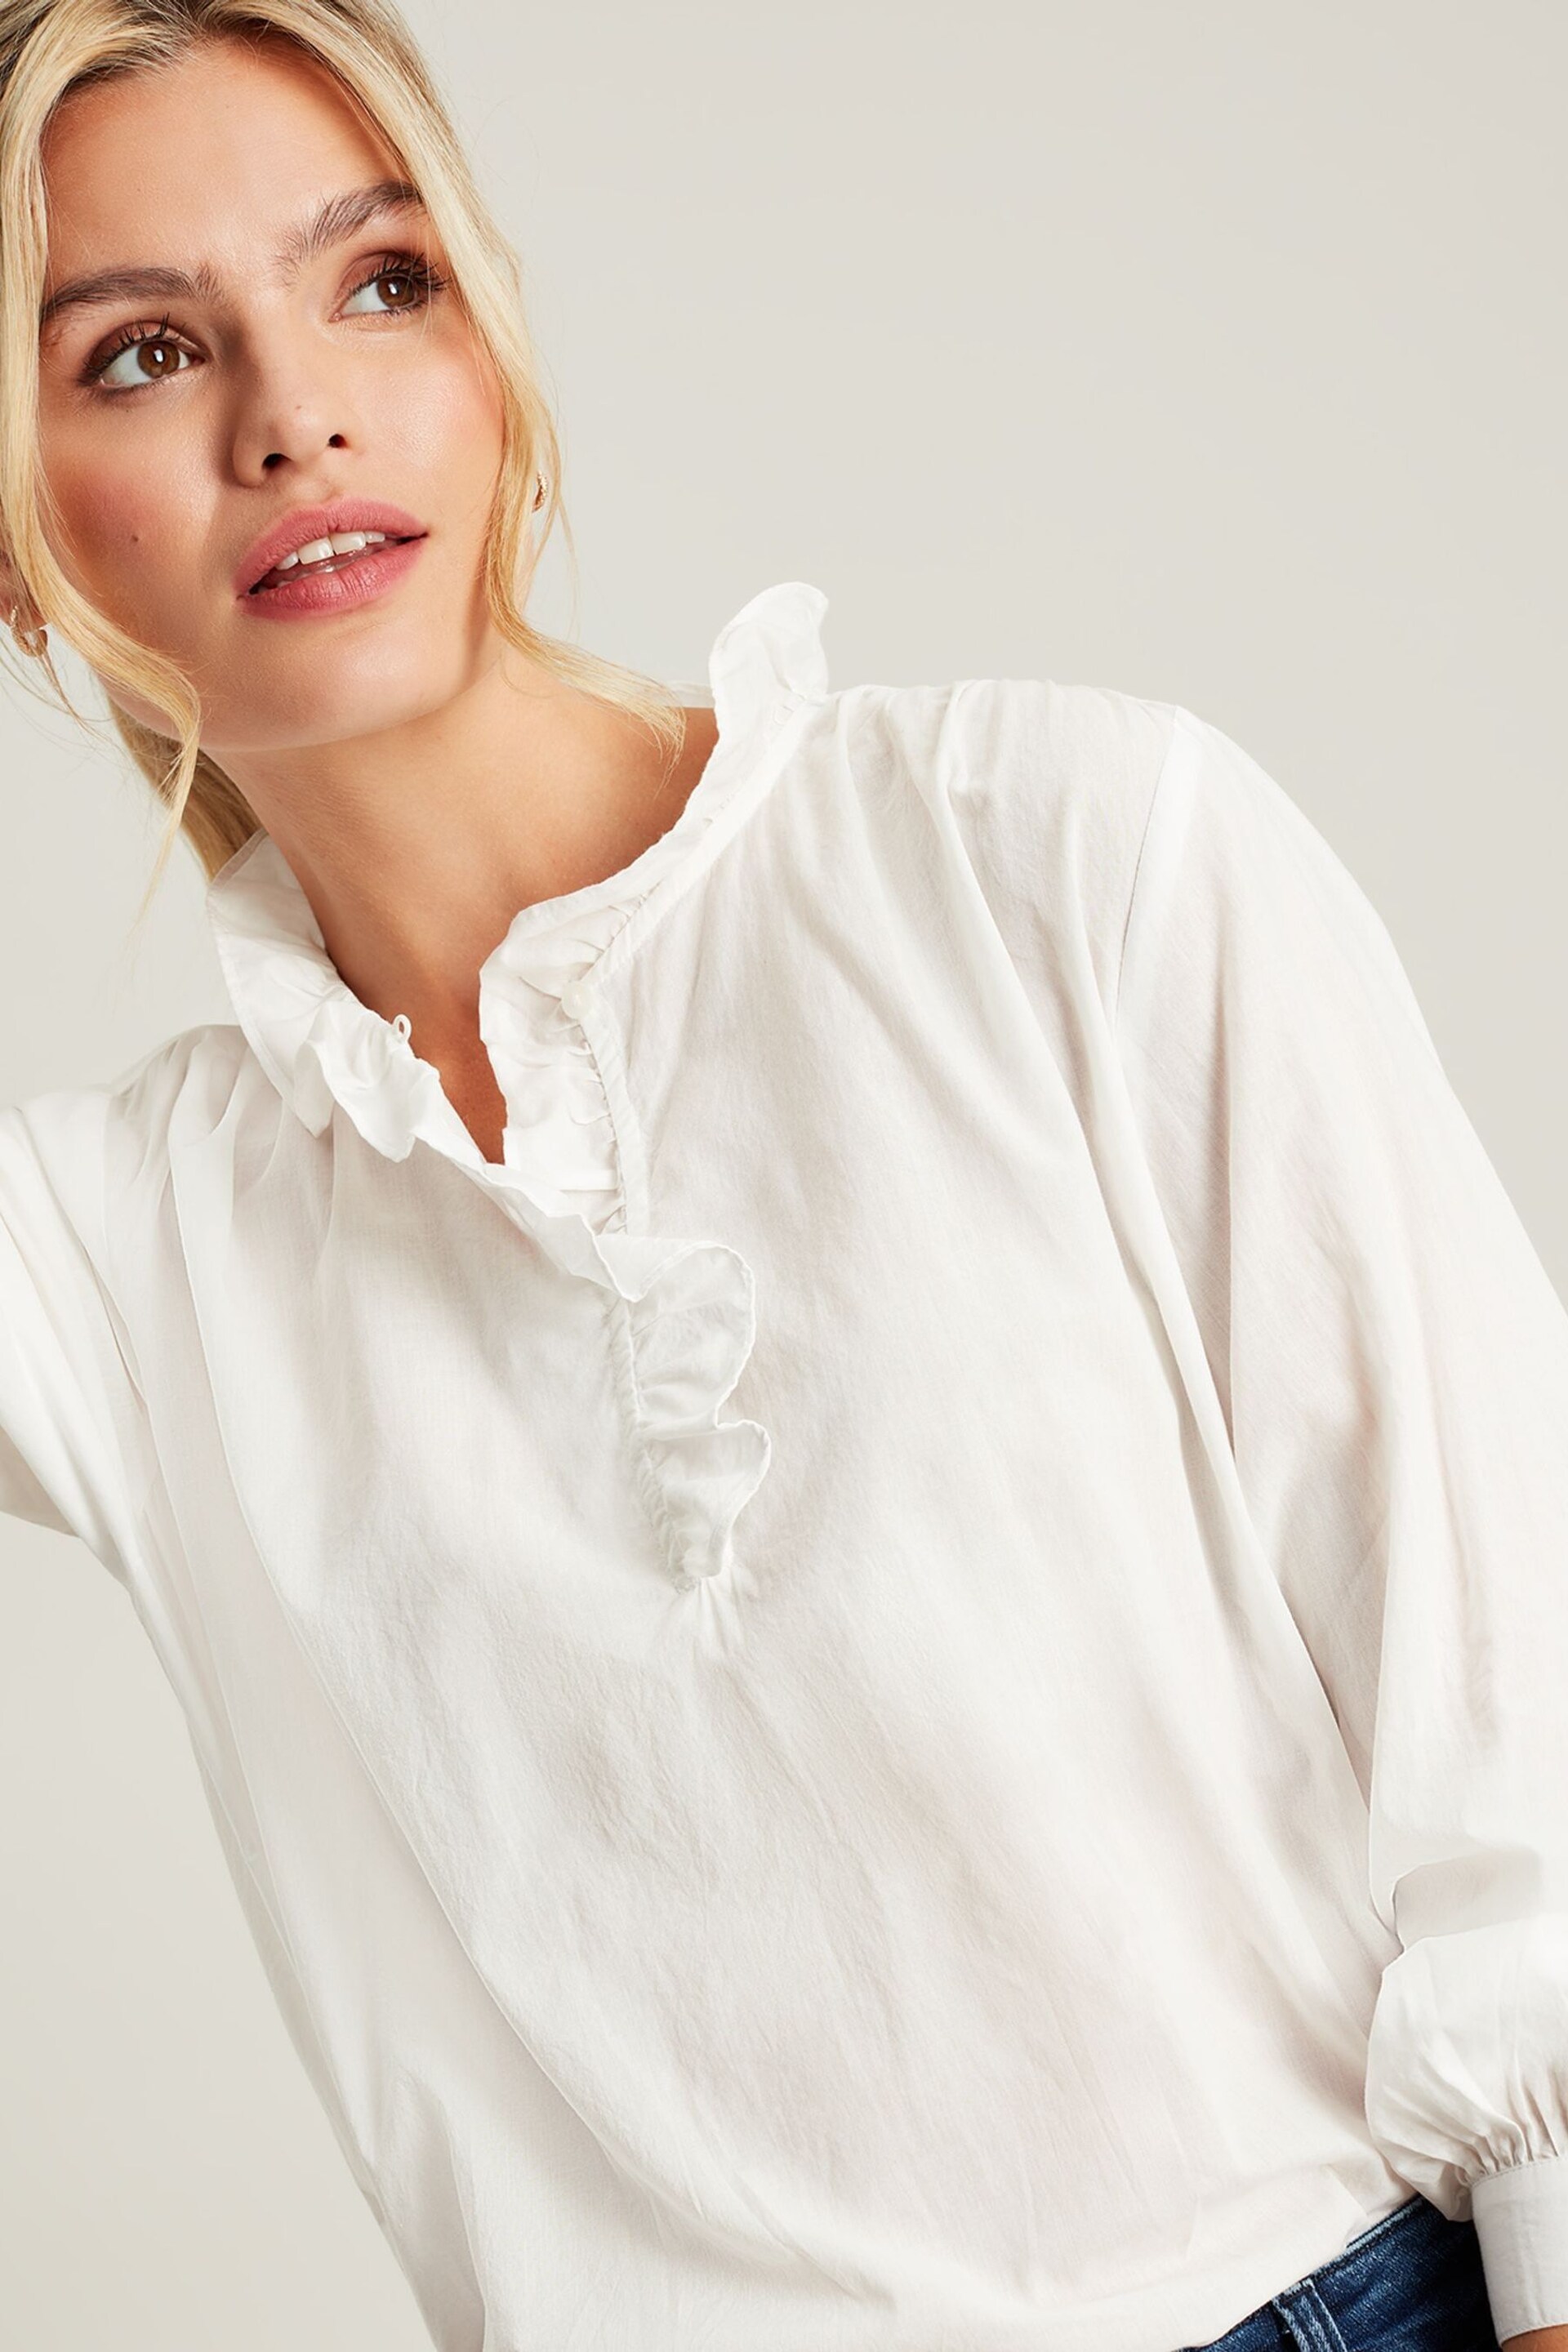 Joules Melanie White Frill Blouse - Image 1 of 5